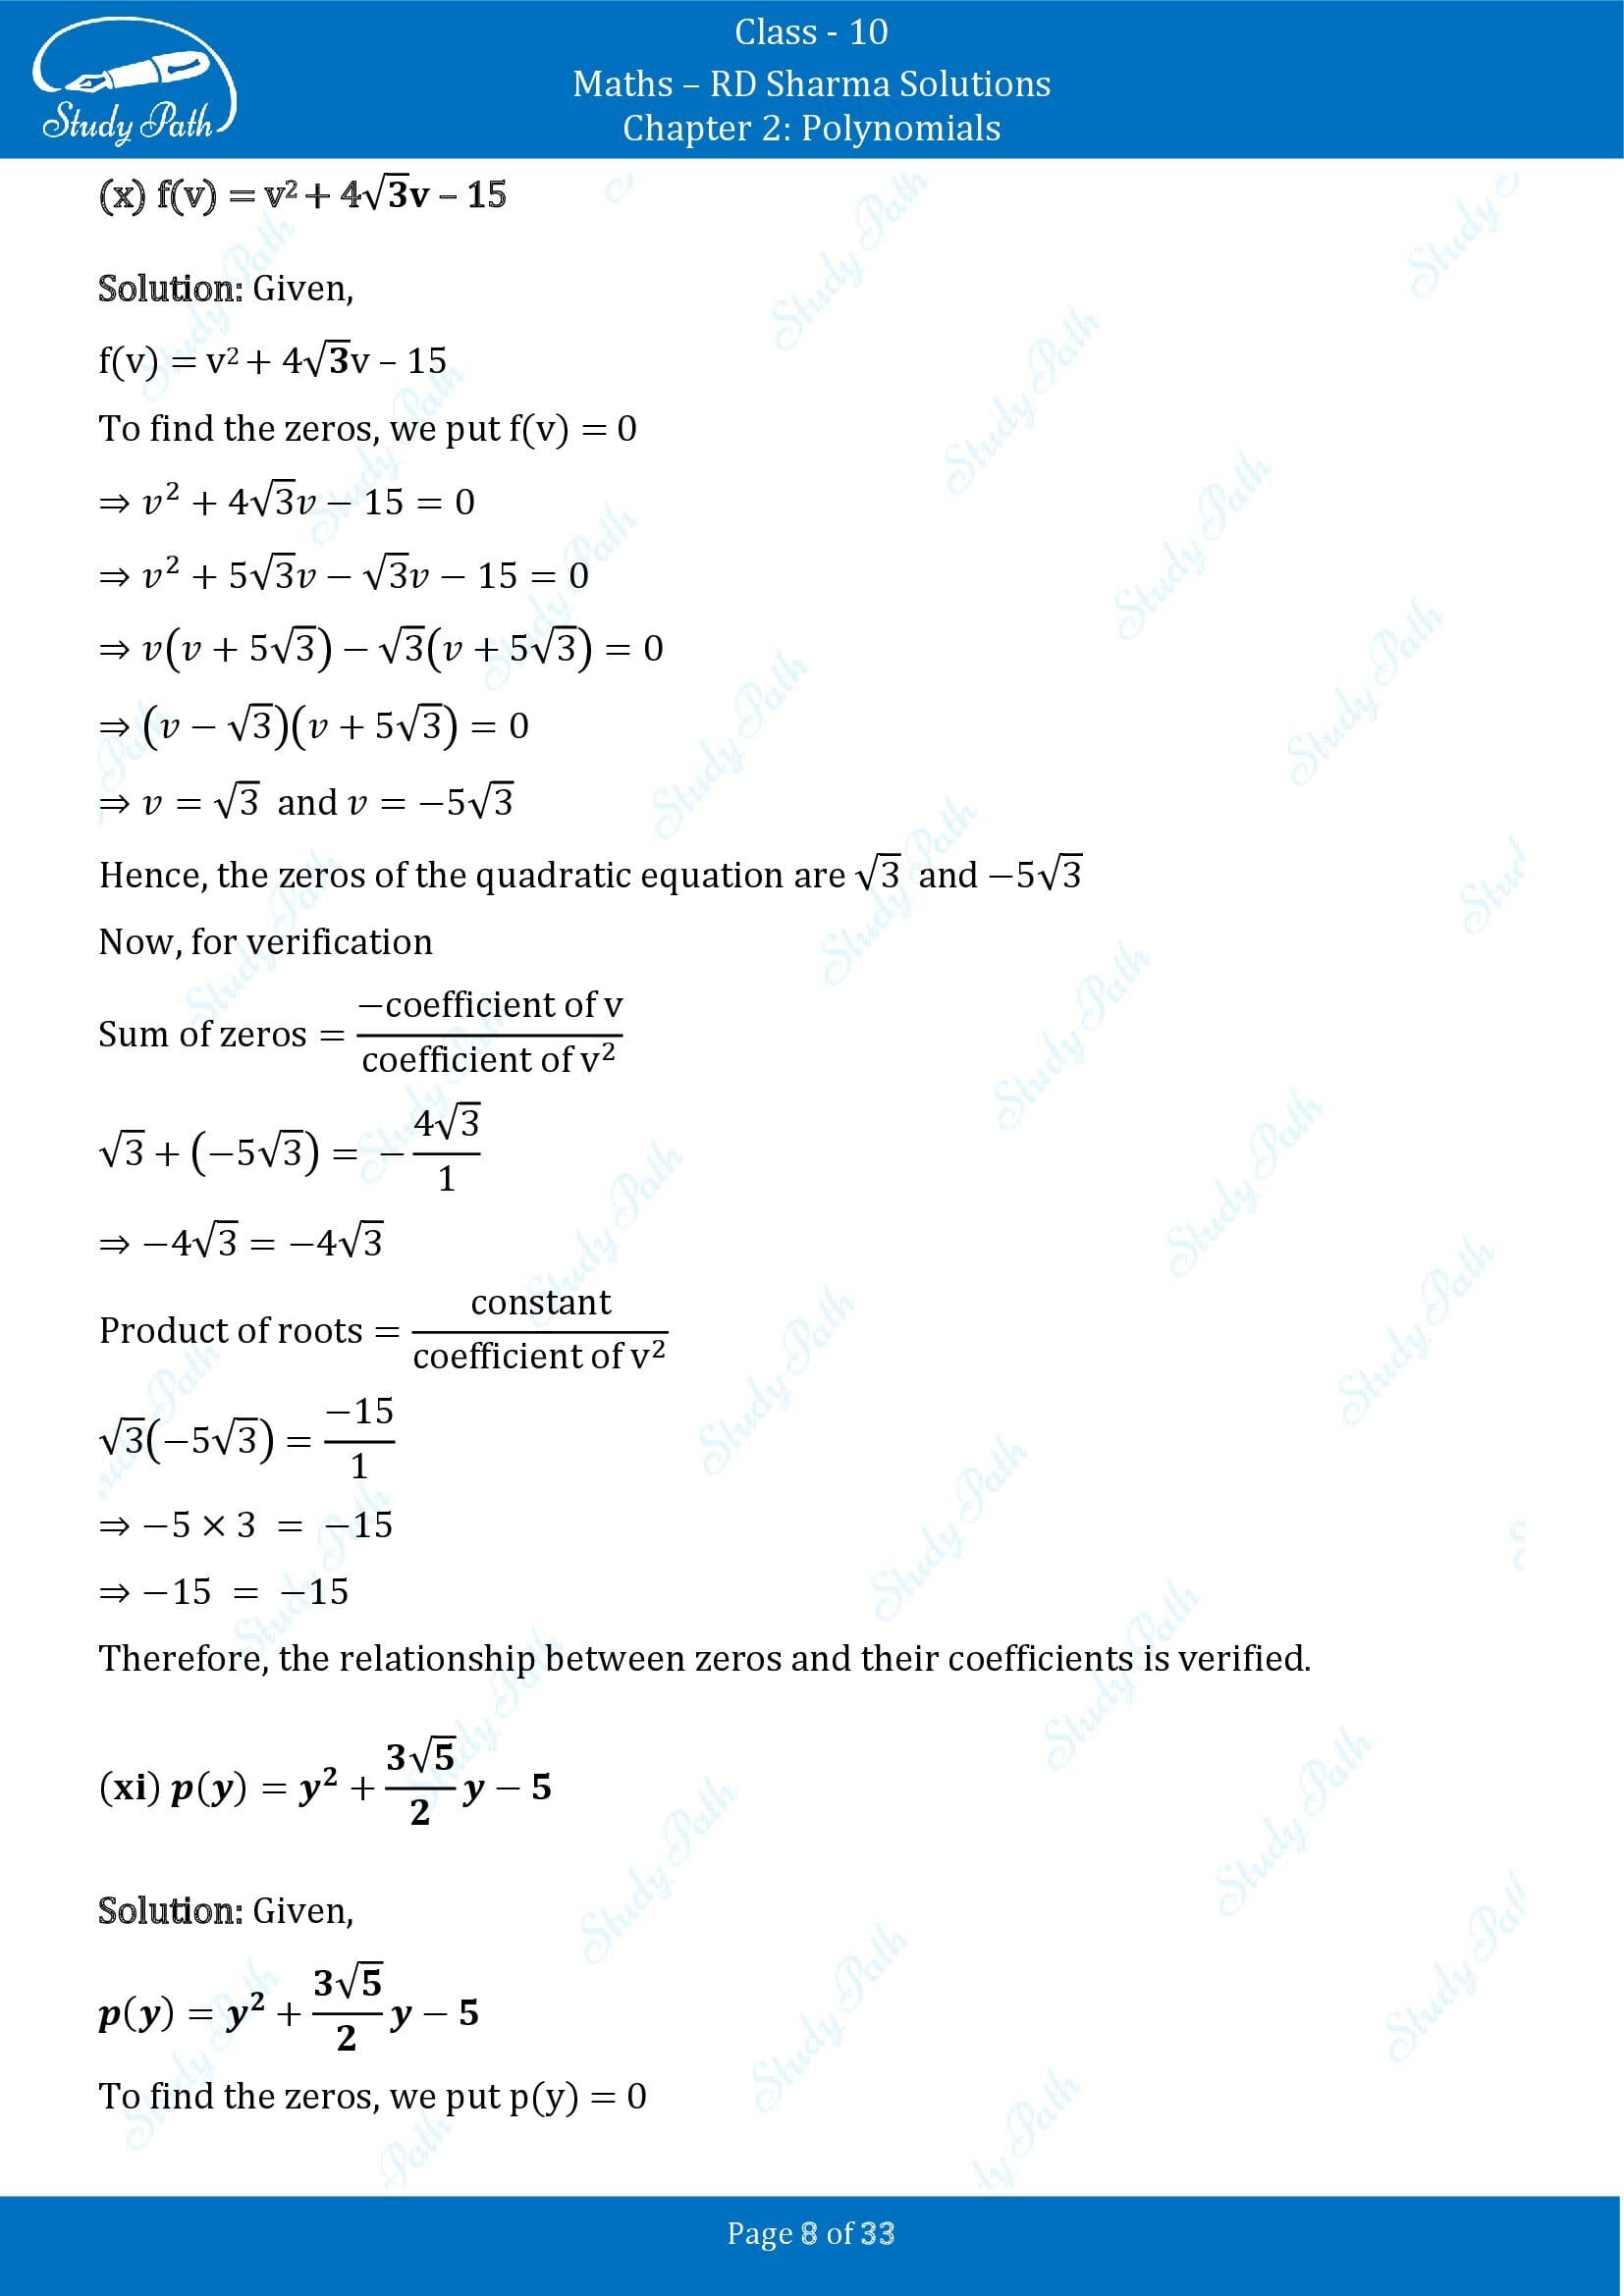 RD Sharma Solutions Class 10 Chapter 2 Polynomials Exercise 2.1 00008